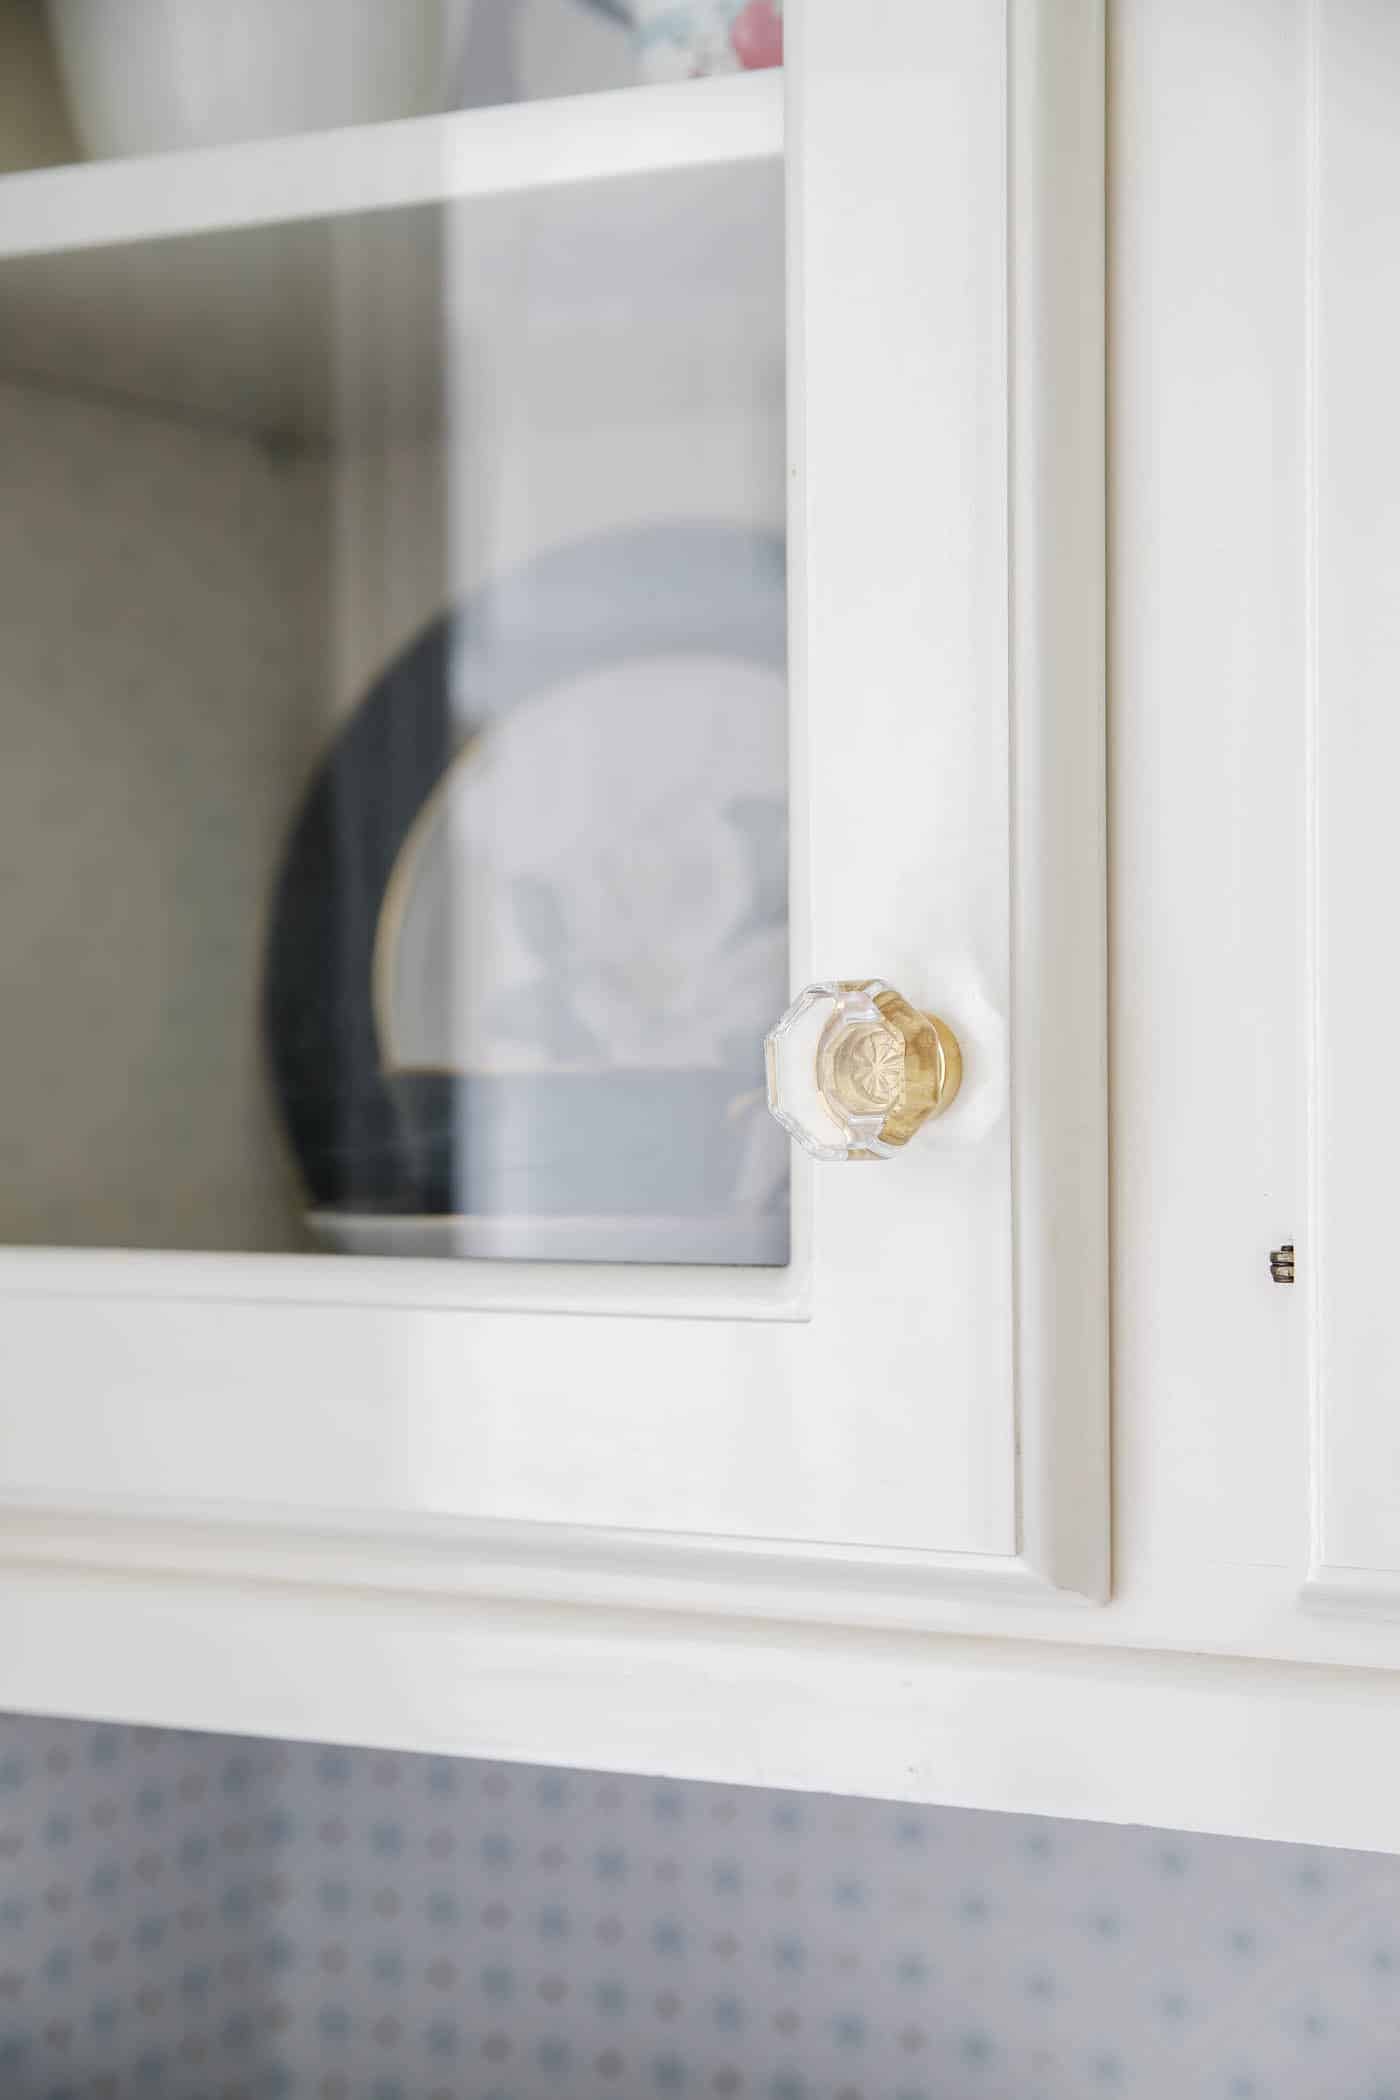 octogonal cabinet knobs on glass front cabinets